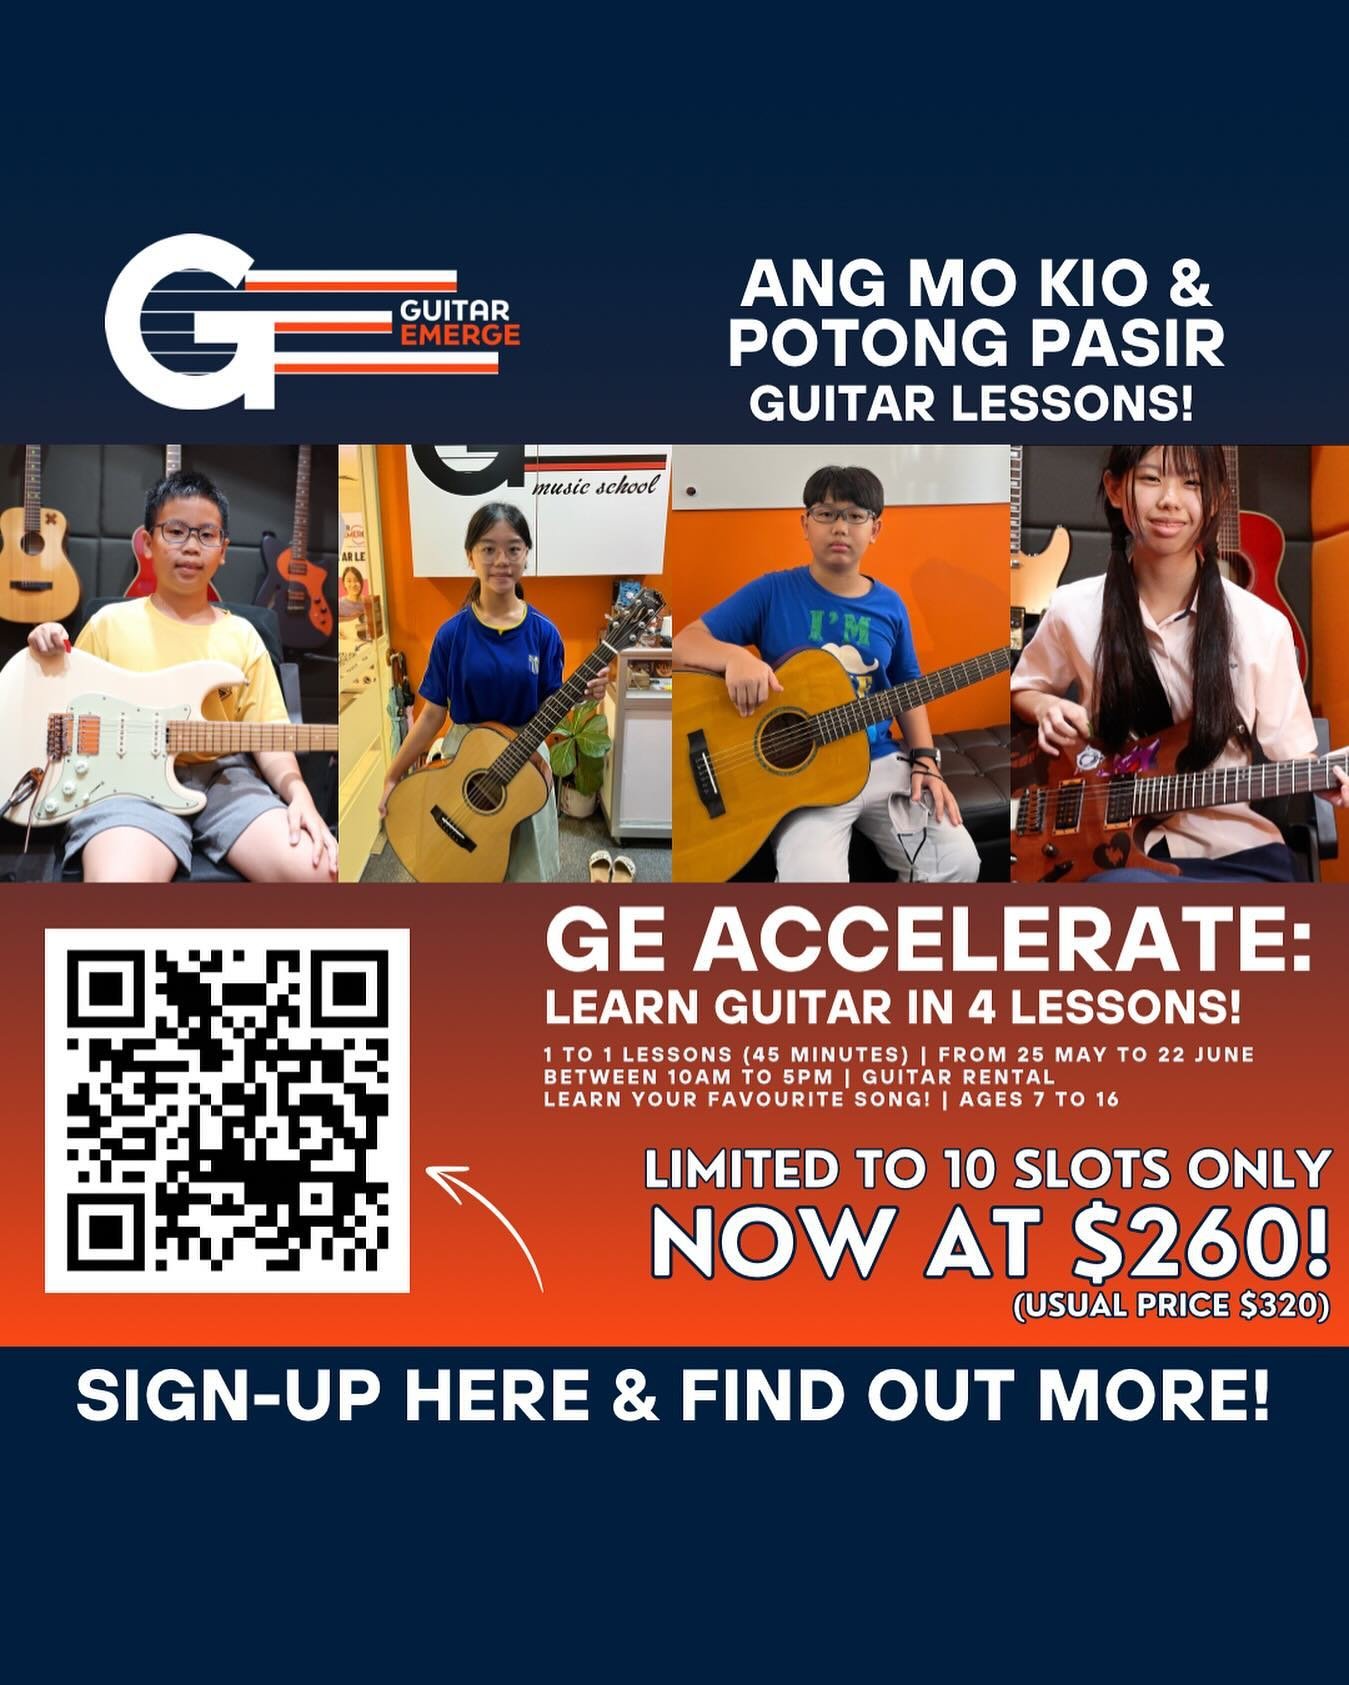 June holidays are around the corner &amp; GE Accelerate is back! In the span of 4 LESSONS, we will equip you the essentials into becoming a blooming guitarist! Looking for students/ youths who are looking for a fun way to spend their holidays! Limite